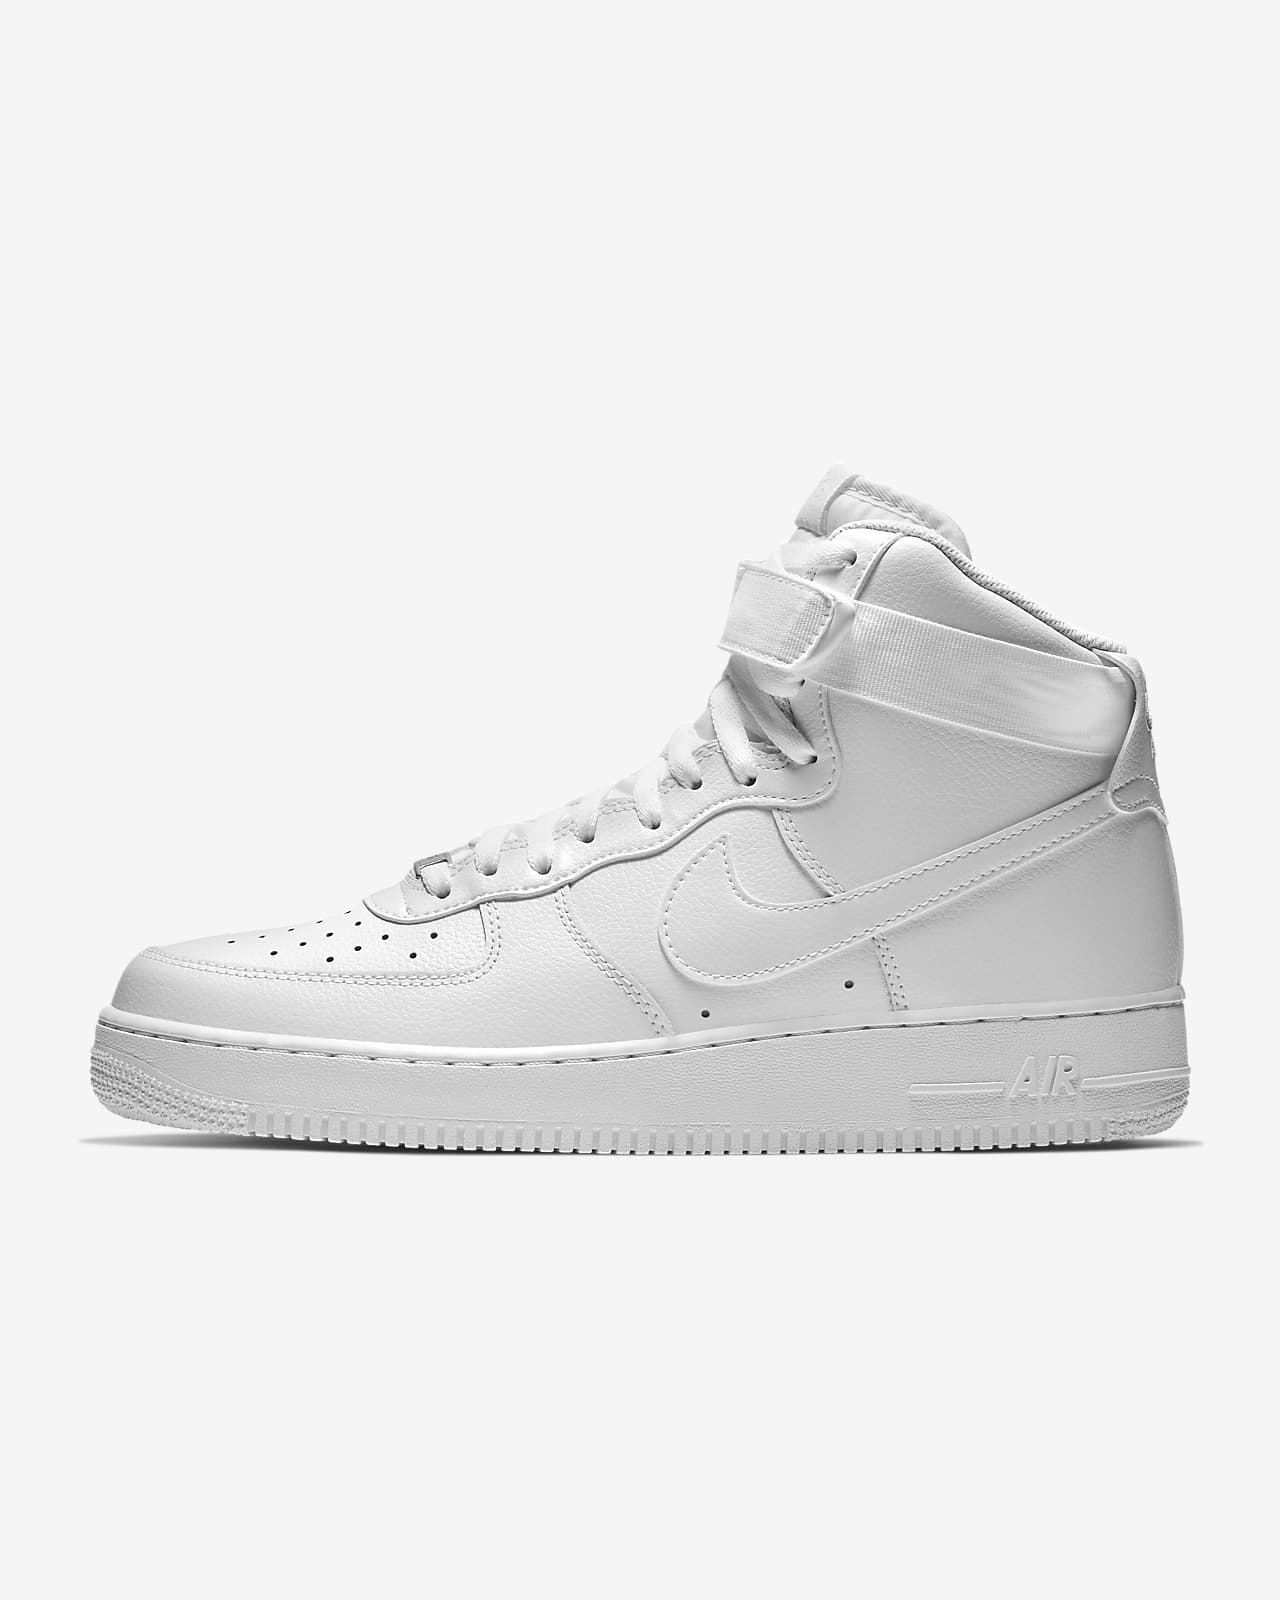 trap Stab above Nike Air Force 1 High '07 Men's Shoes. Nike.com